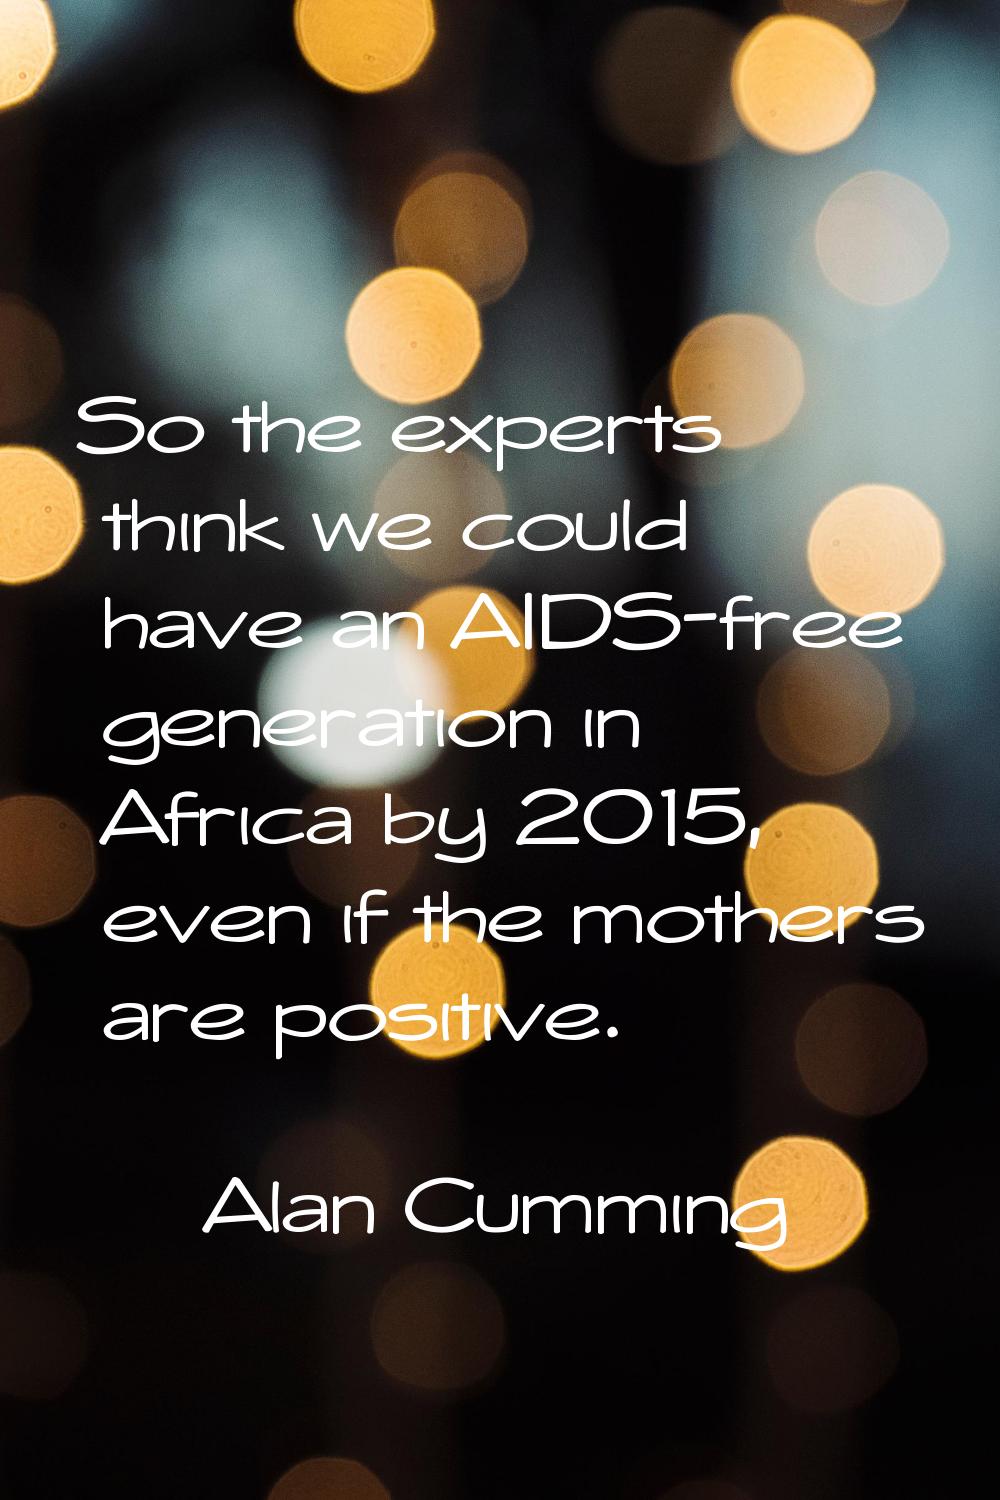 So the experts think we could have an AIDS-free generation in Africa by 2015, even if the mothers a